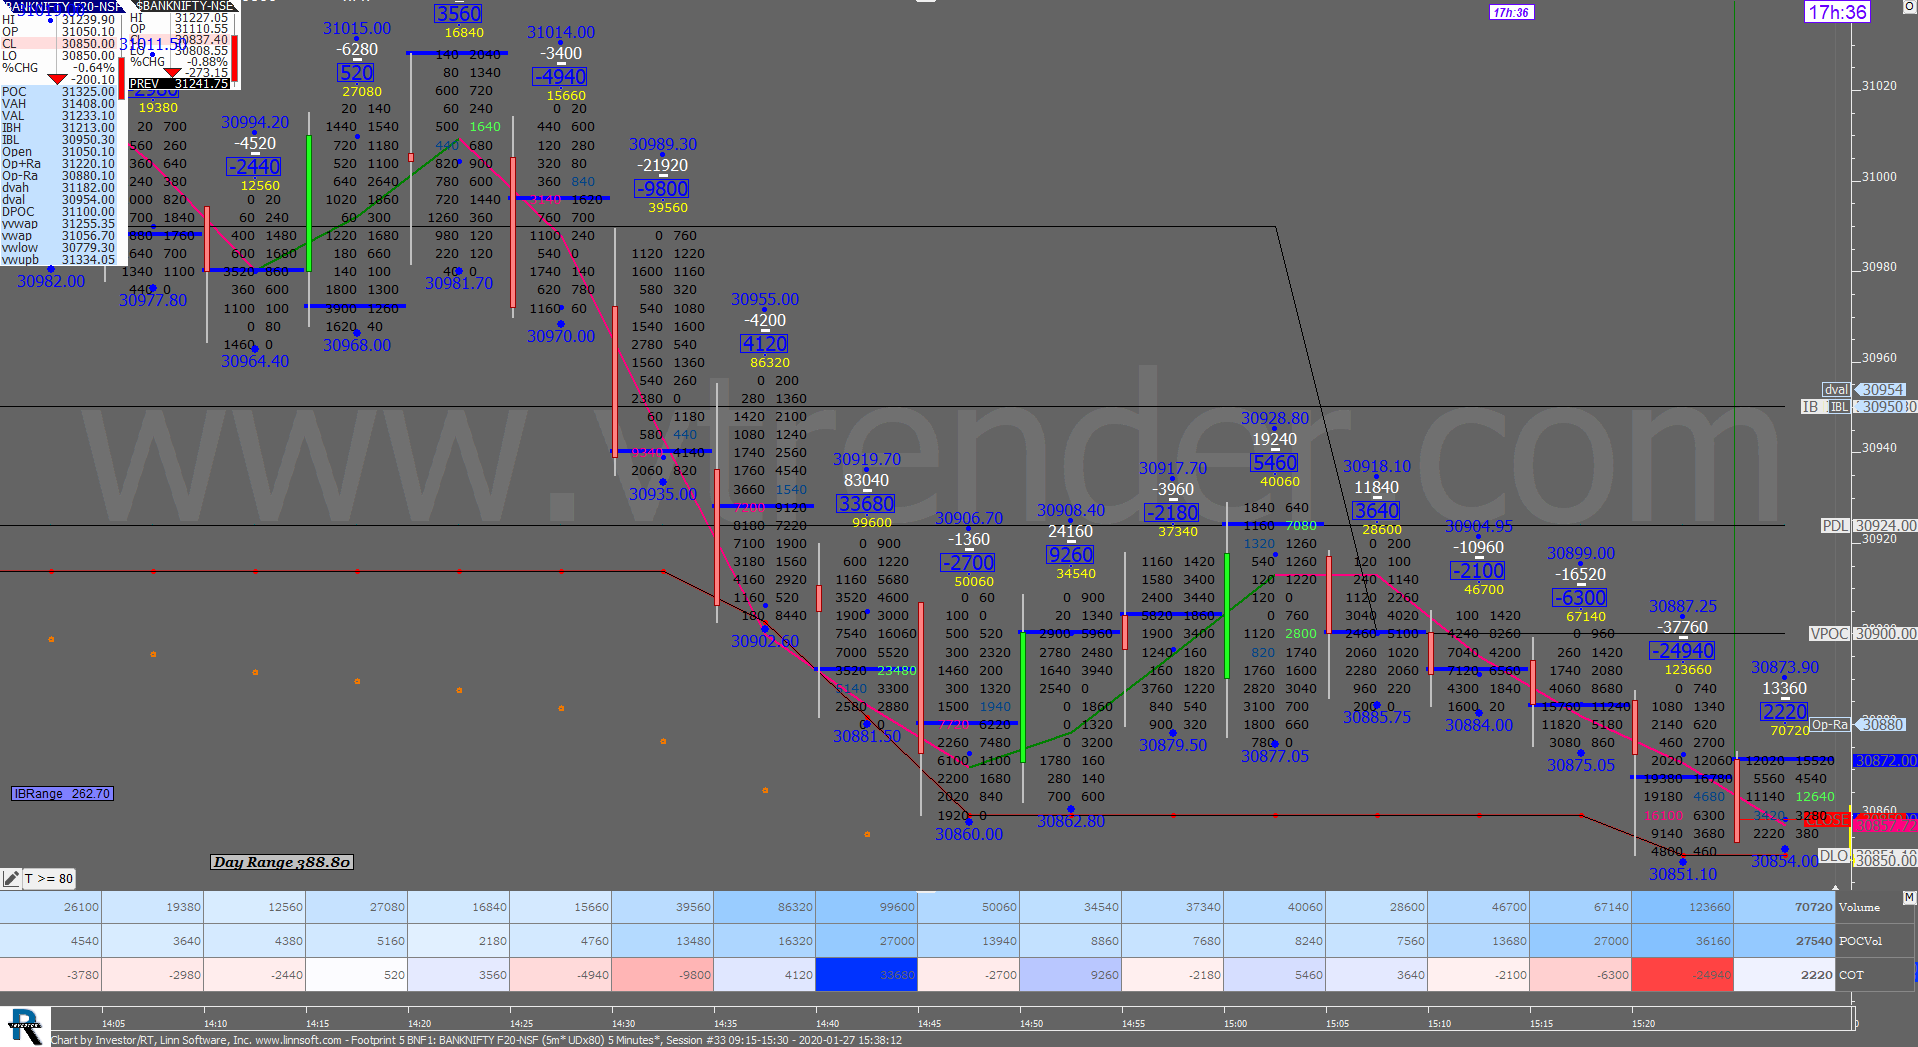 5 33 Order Flow Charts Dated 27Th Jan 2020 (5 Mins) Banknifty Futures, Day Trading, Intraday Trading, Intraday Trading Strategies, Nifty Futures, Order Flow Analysis, Support And Resistance, Trading Strategies, Volume Profile Trading